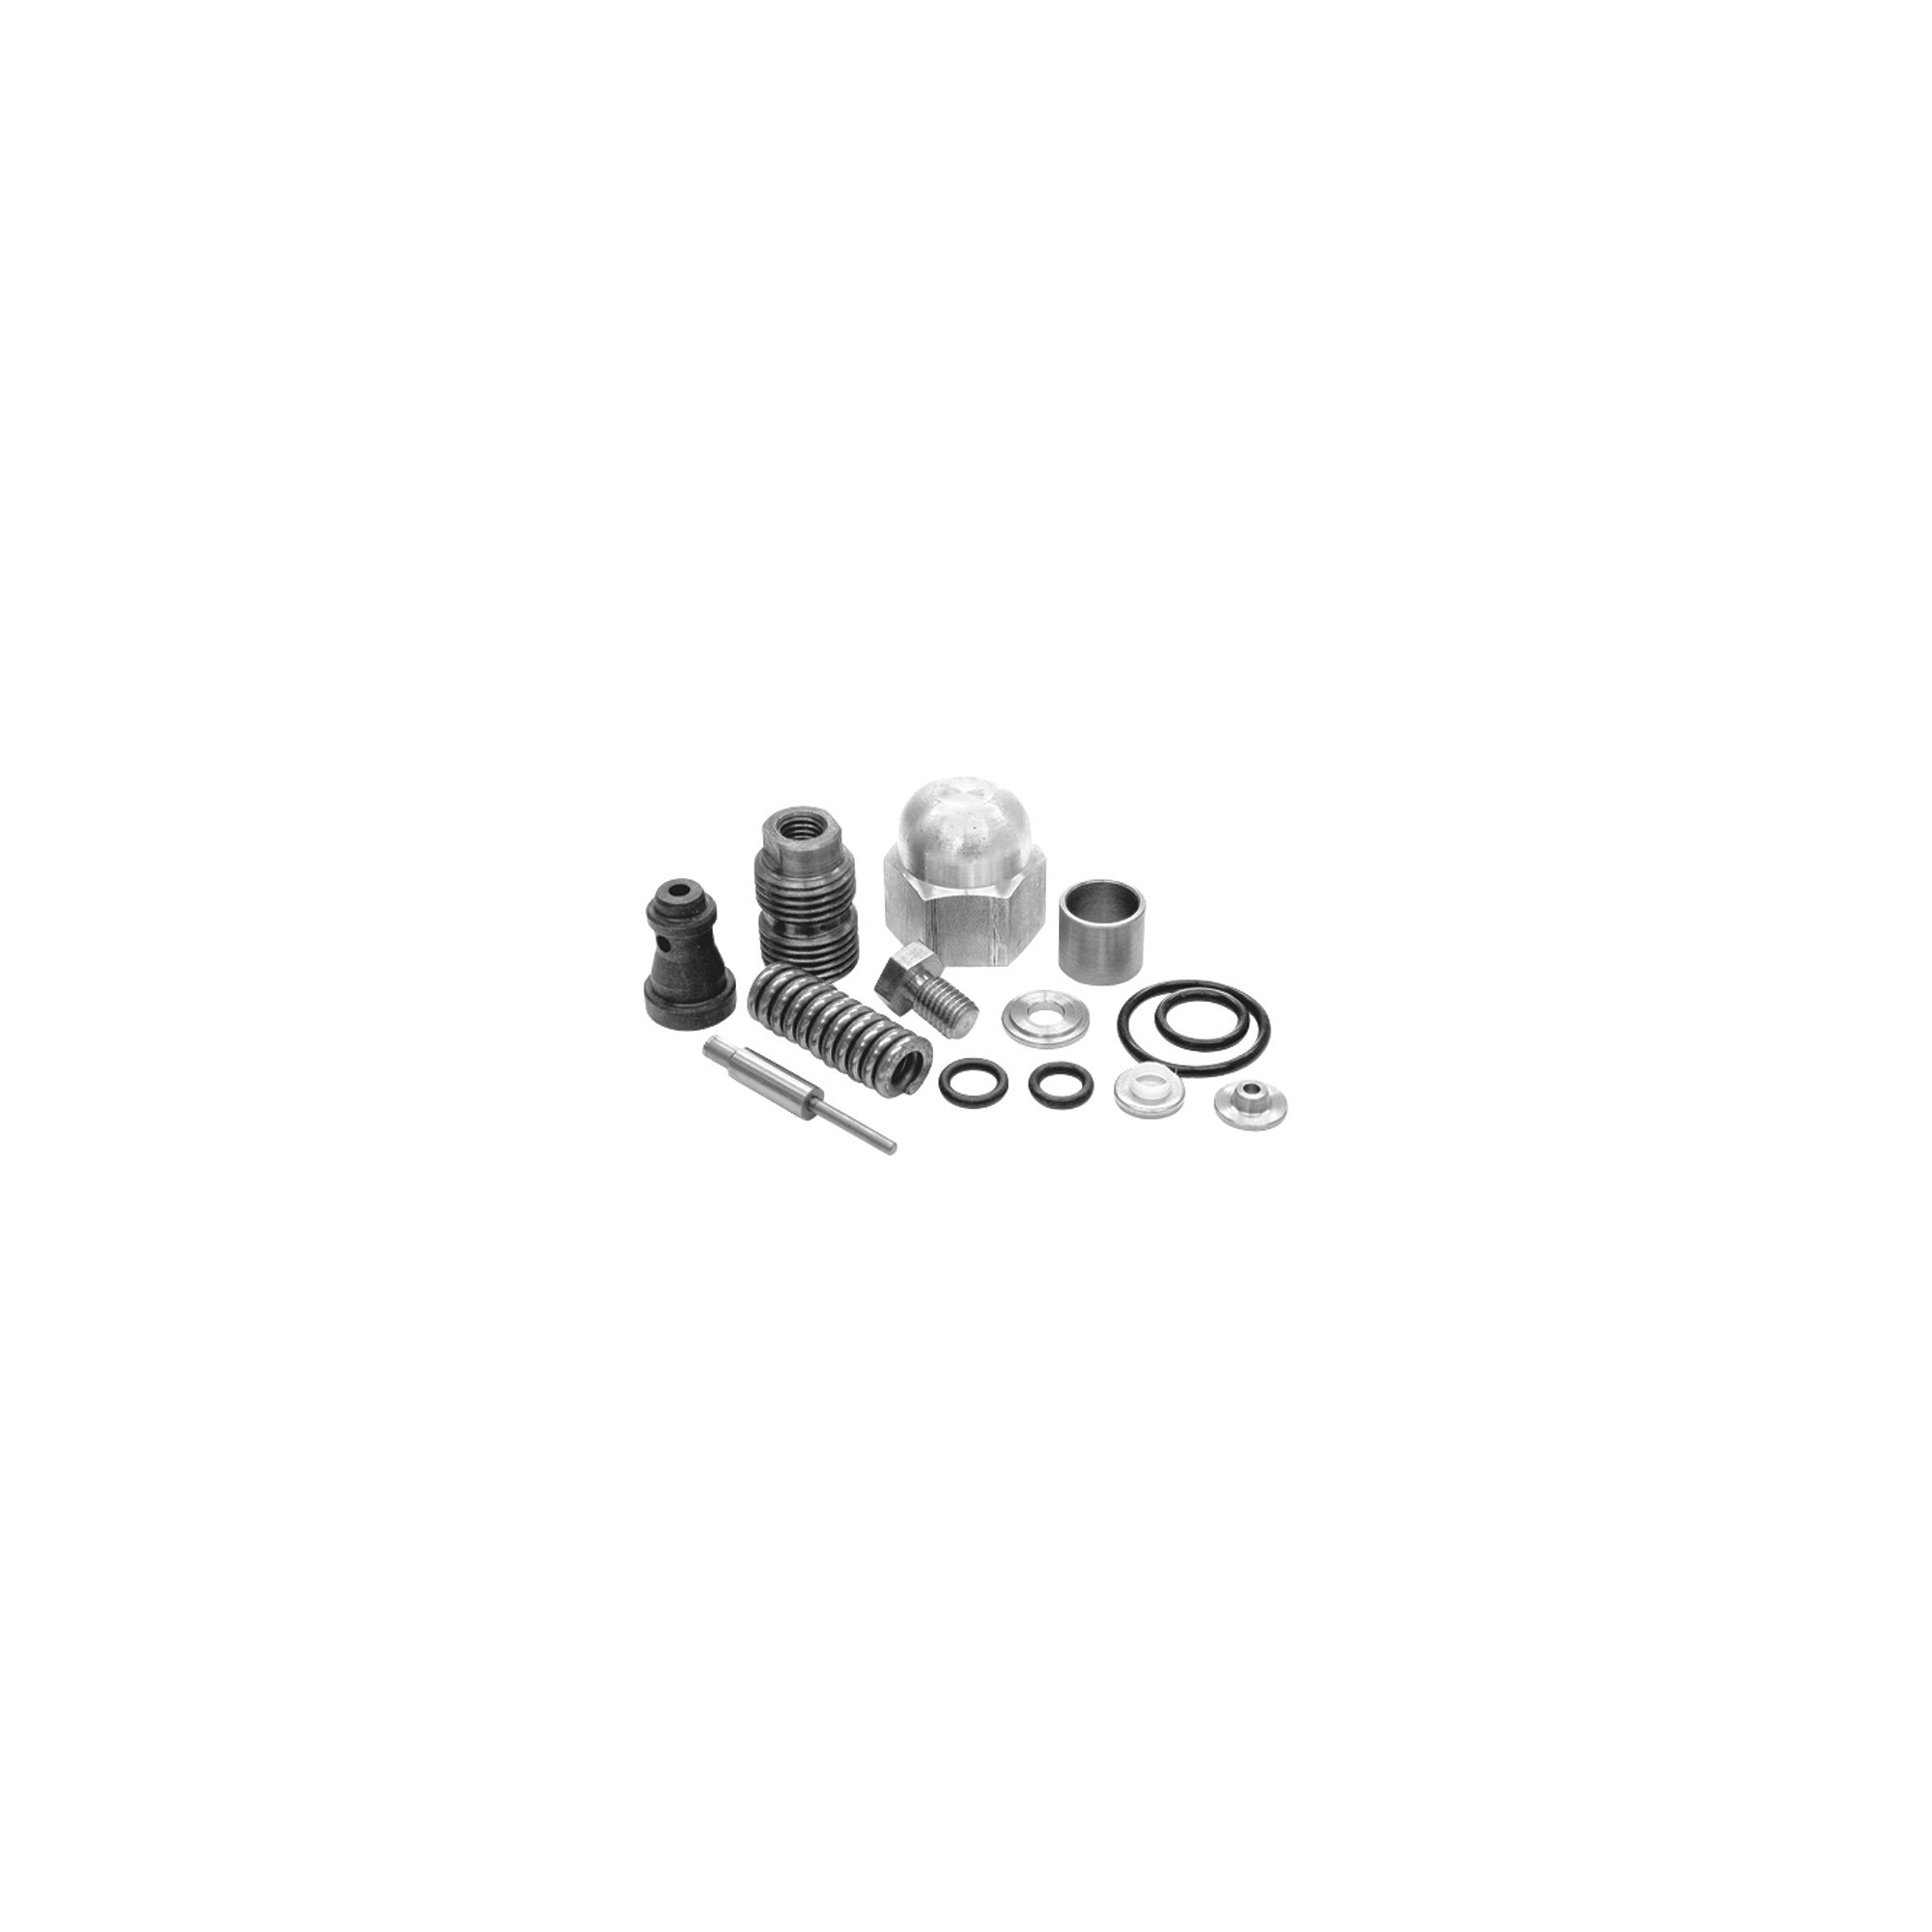 Buyers Crossover Valve Kit, For Meyer Snowplows, Replaces Part# 15606, Model 1306105